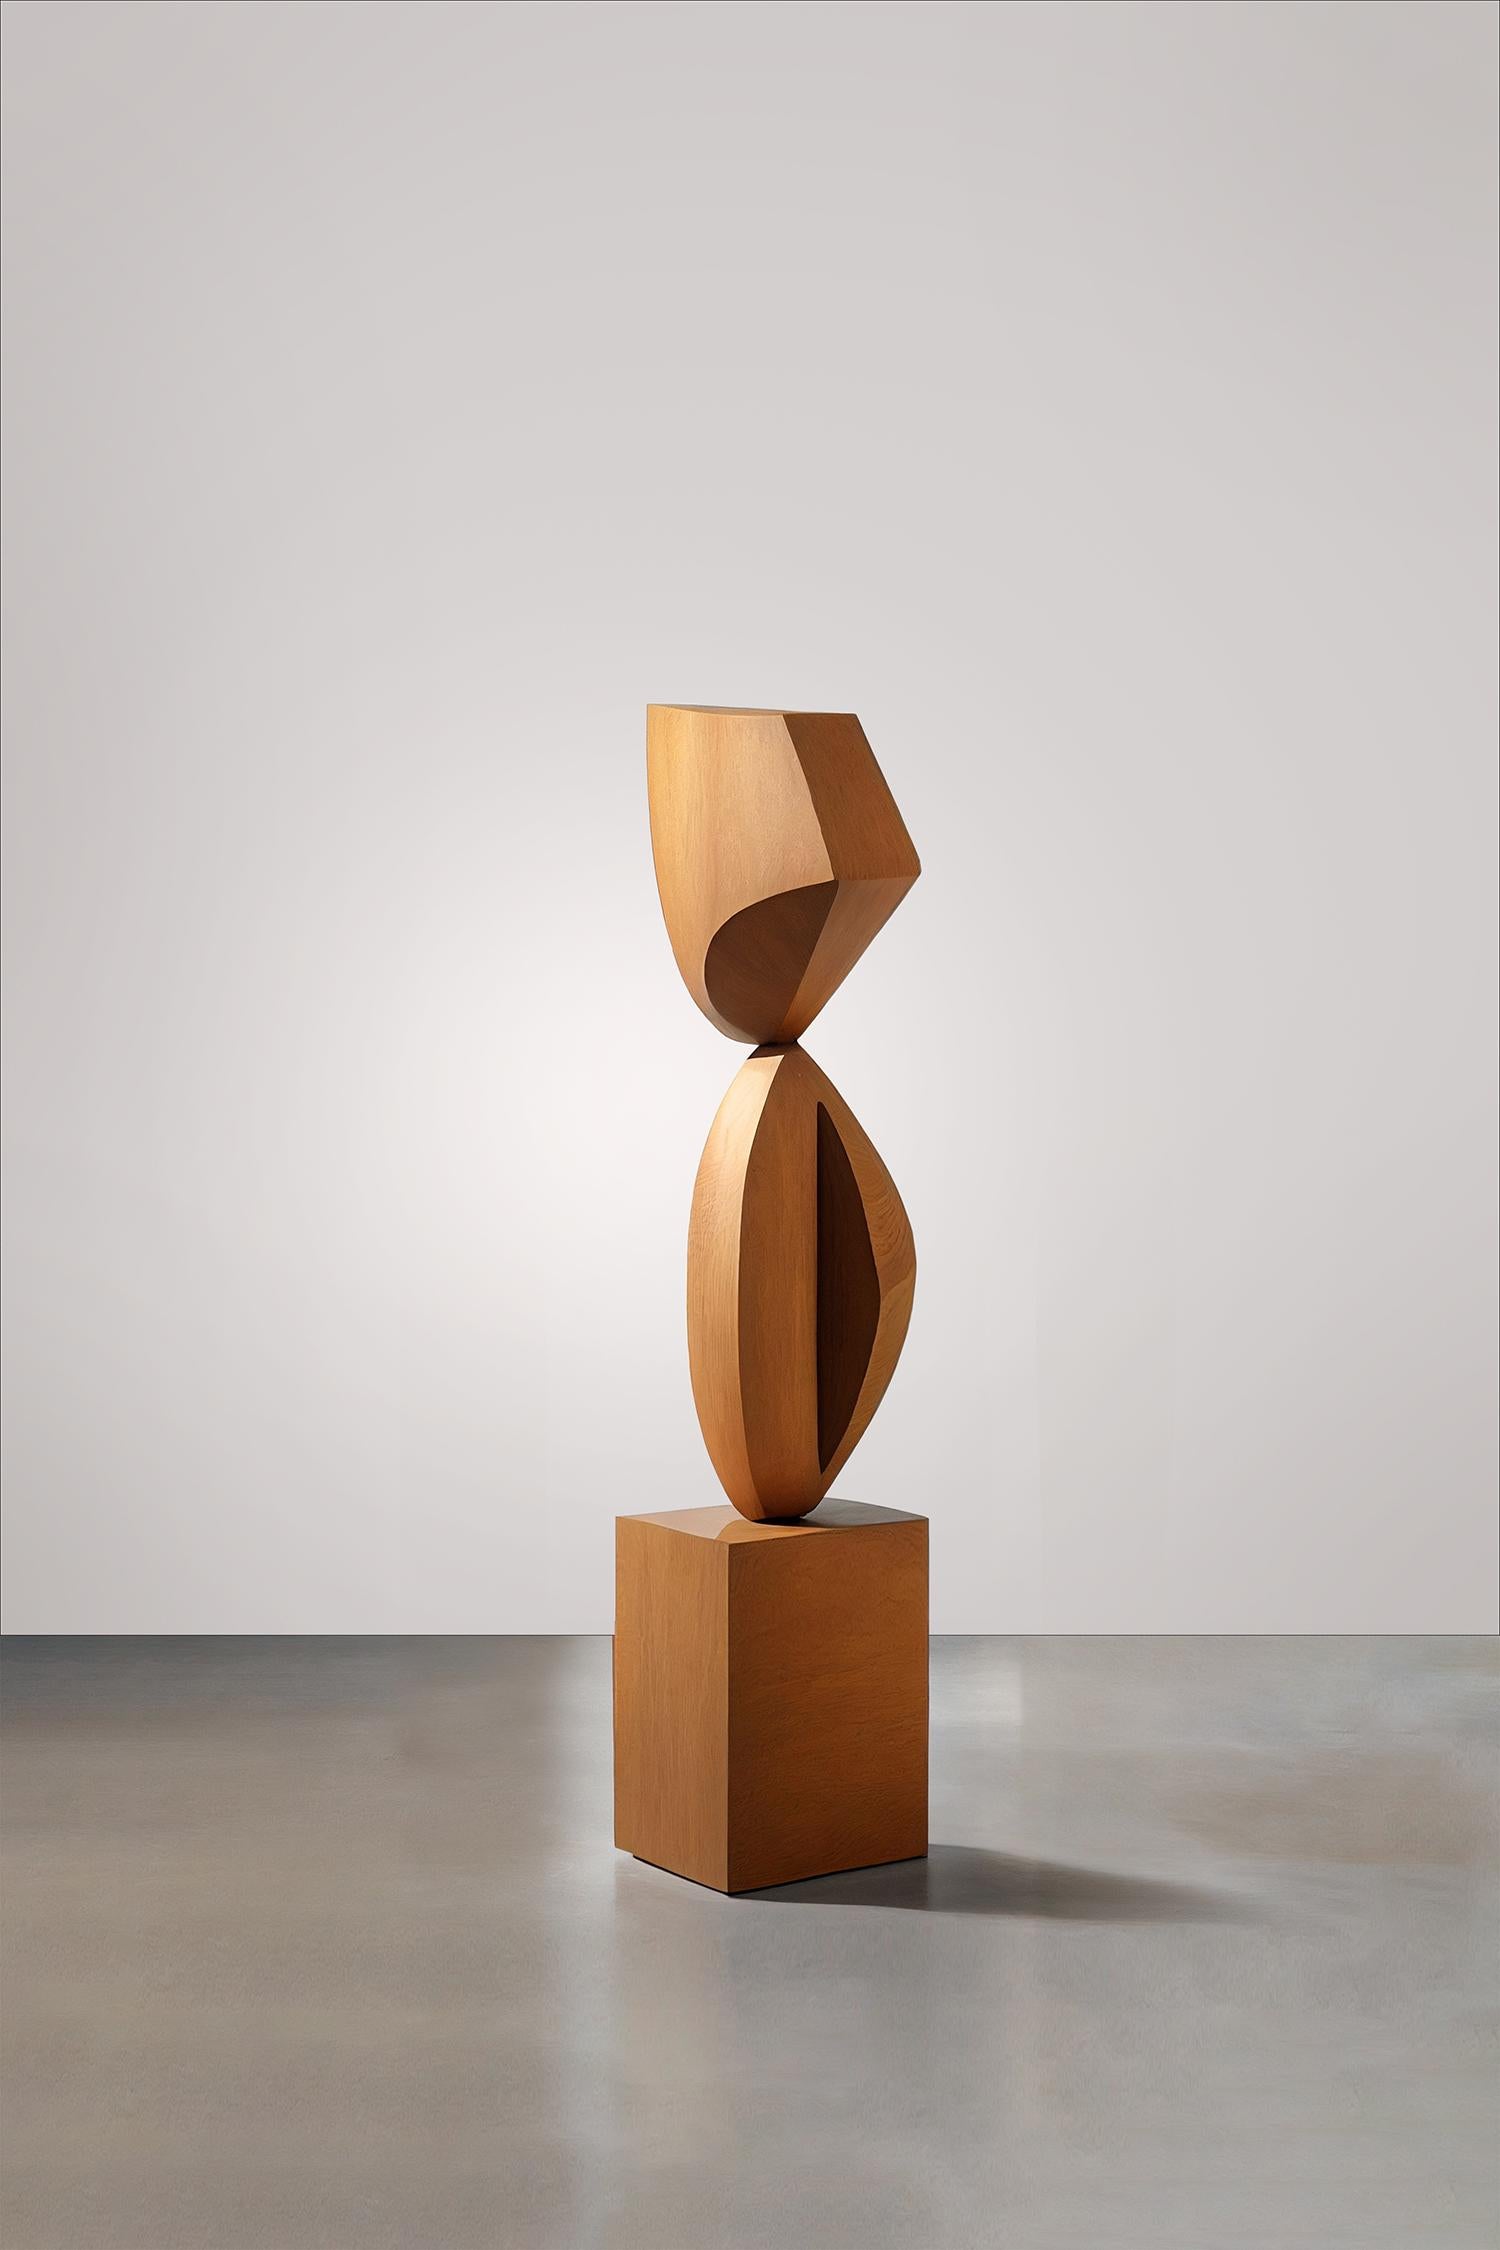 Bauhaus Monumental Wooden Sculpture Inspired in Constantin Brancusi Style For Sale